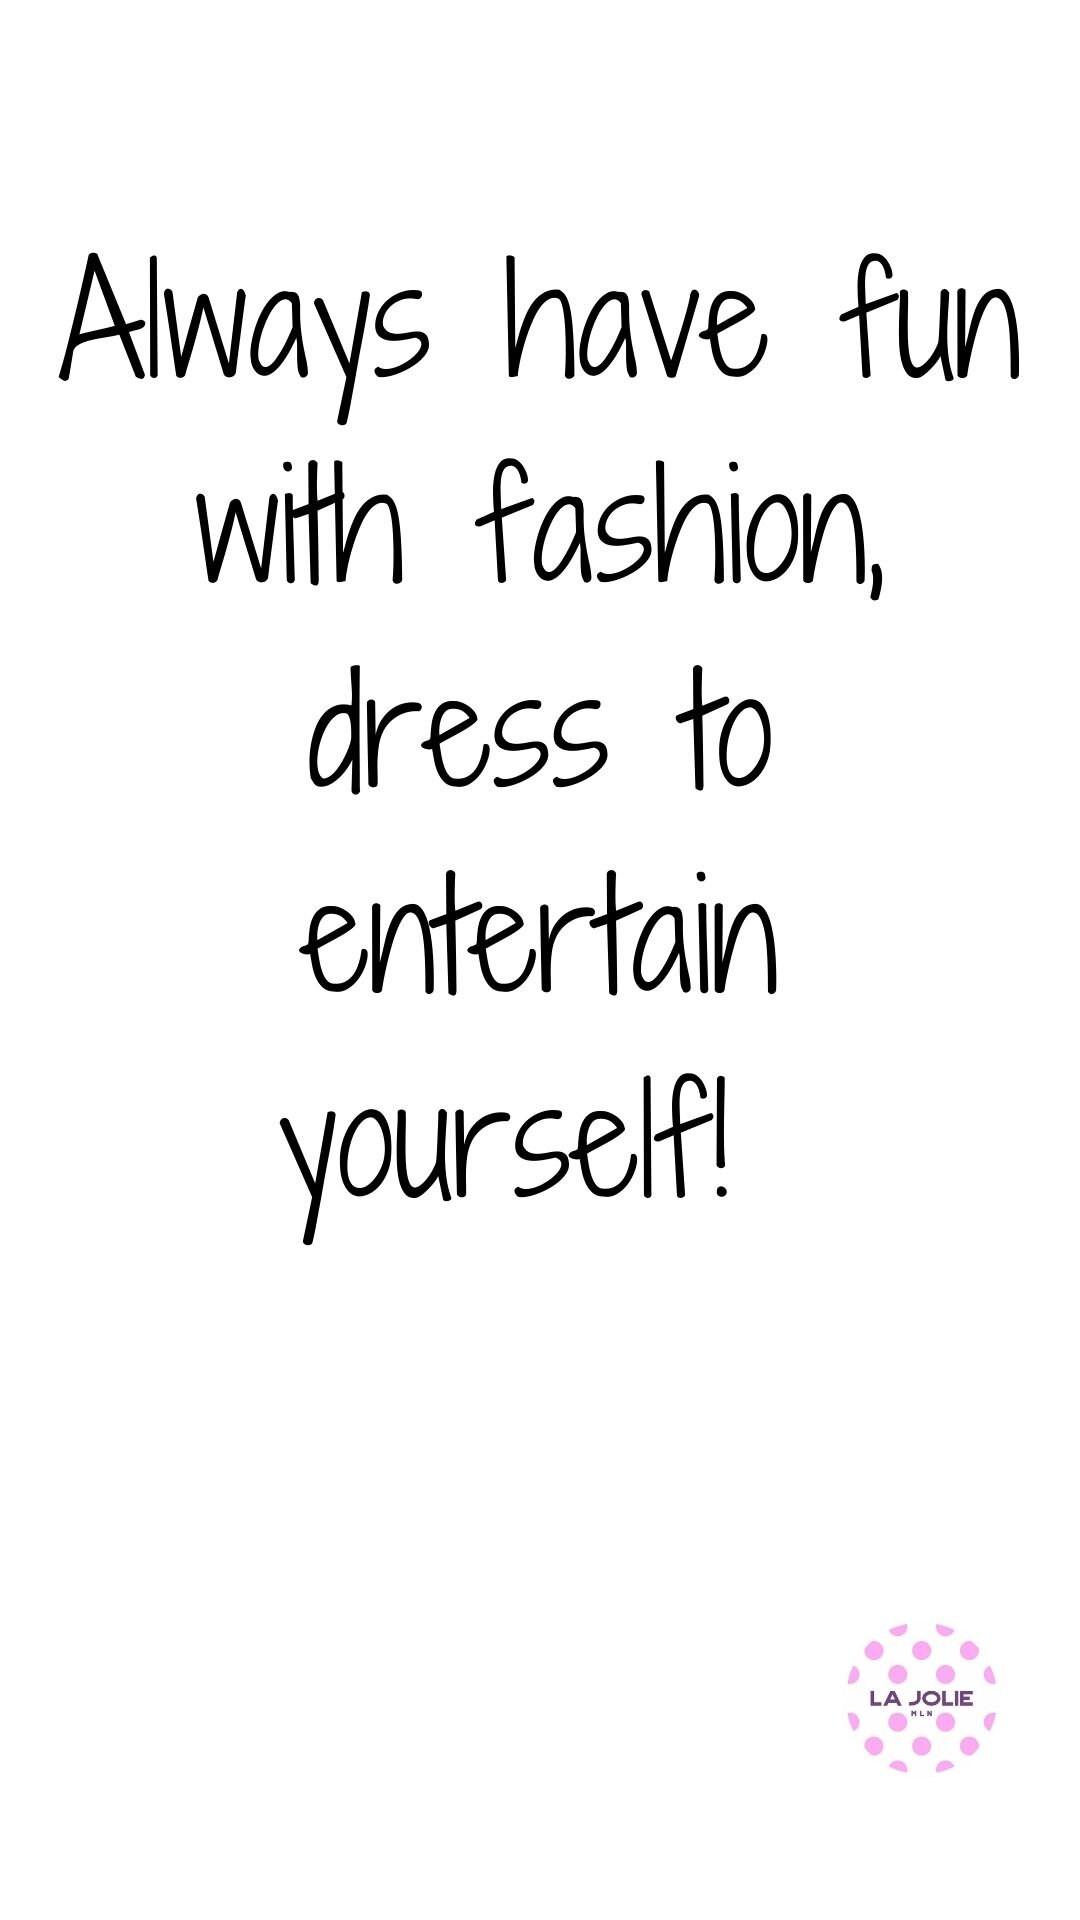 Always have fun with fashion, dress to entertain yourself!.jpg